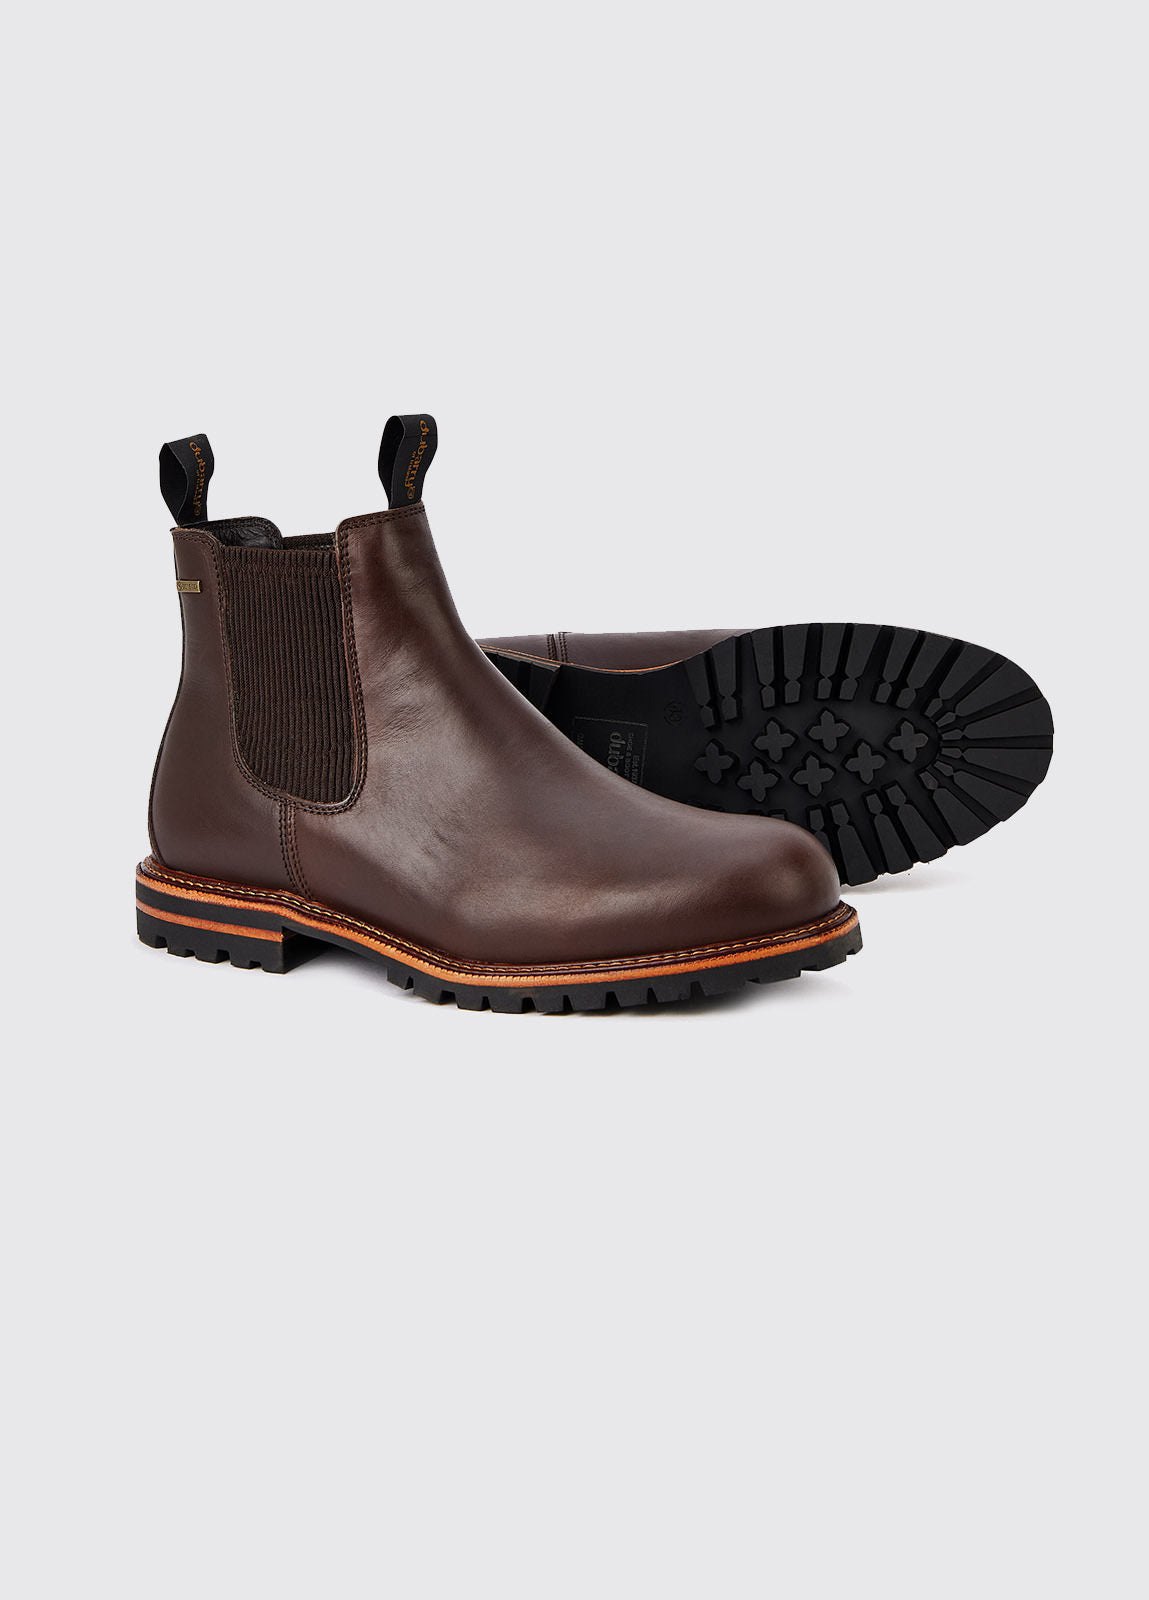 Offaly Ankle Boot - Mahogany